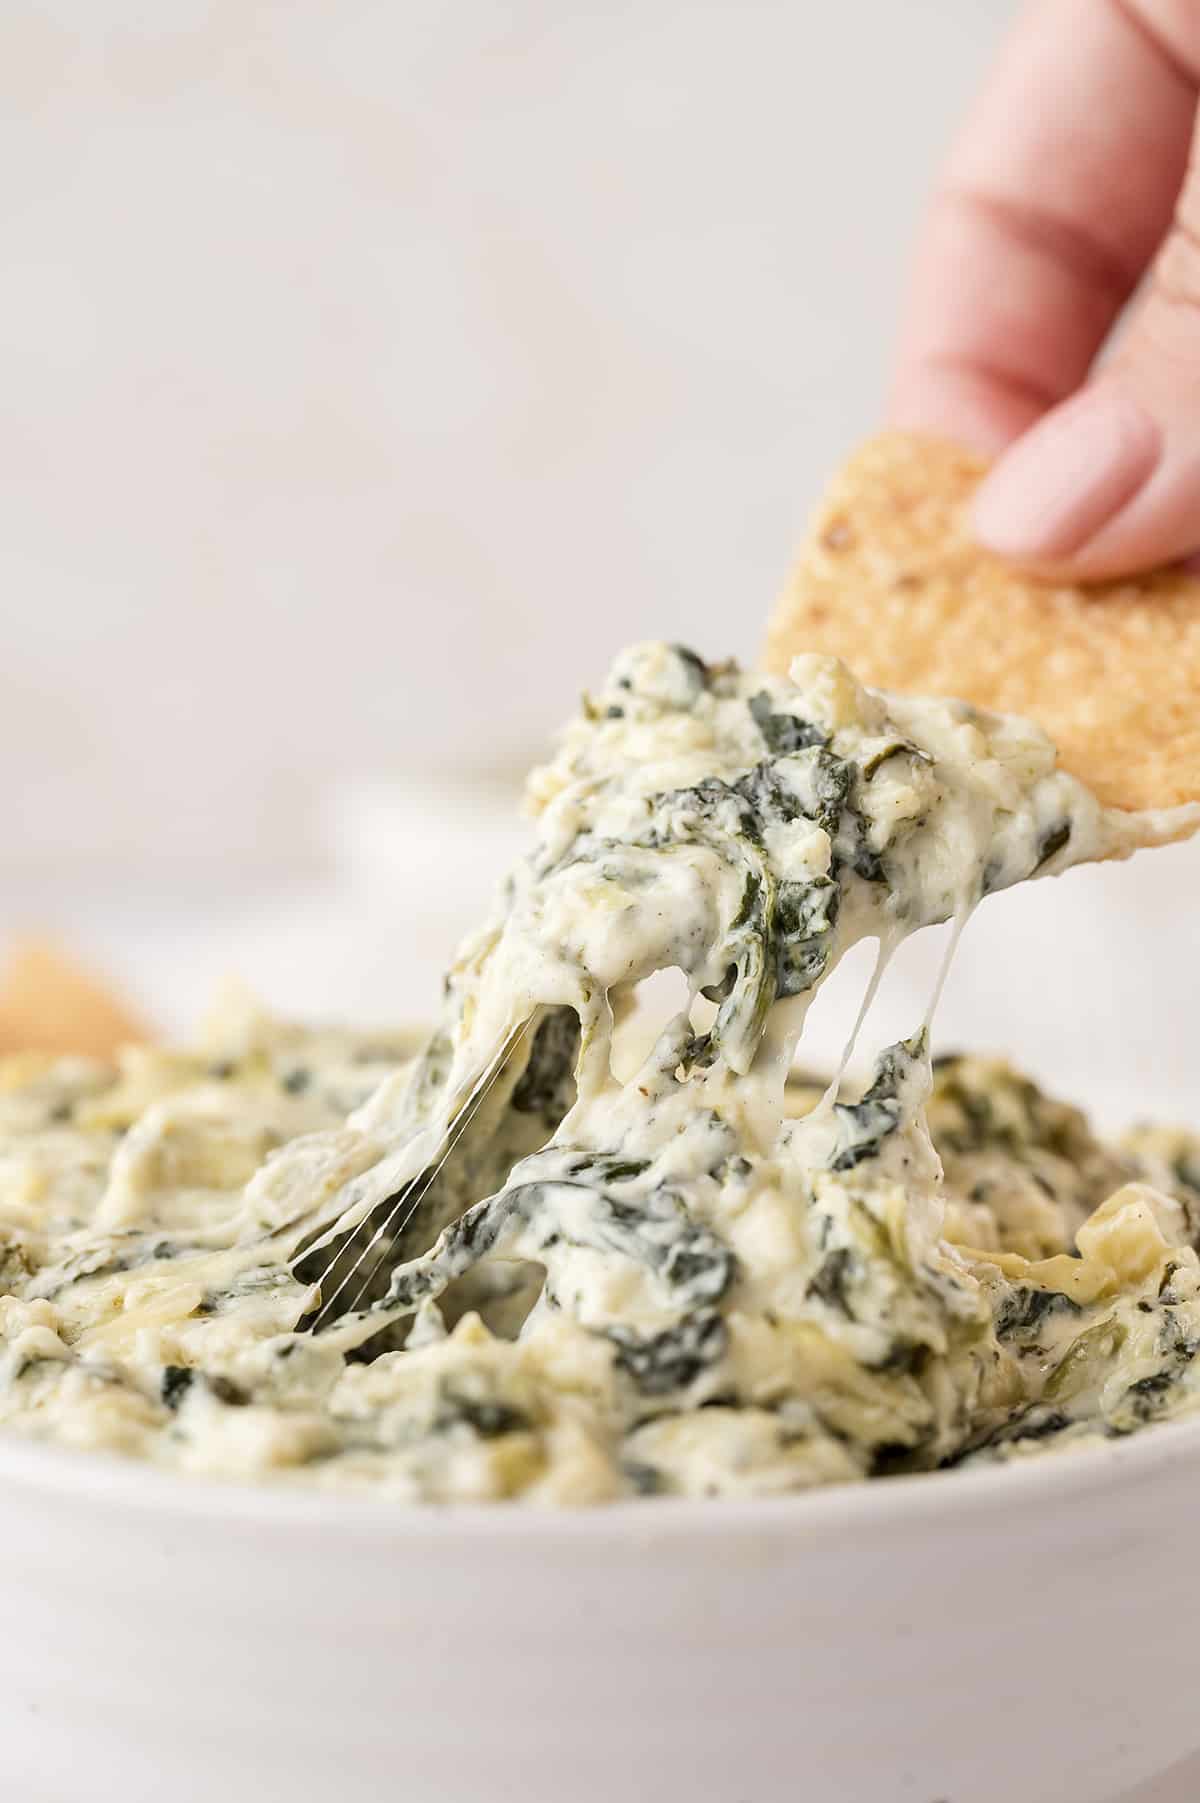 Hand dipping a chip into spinach artichoke dip.